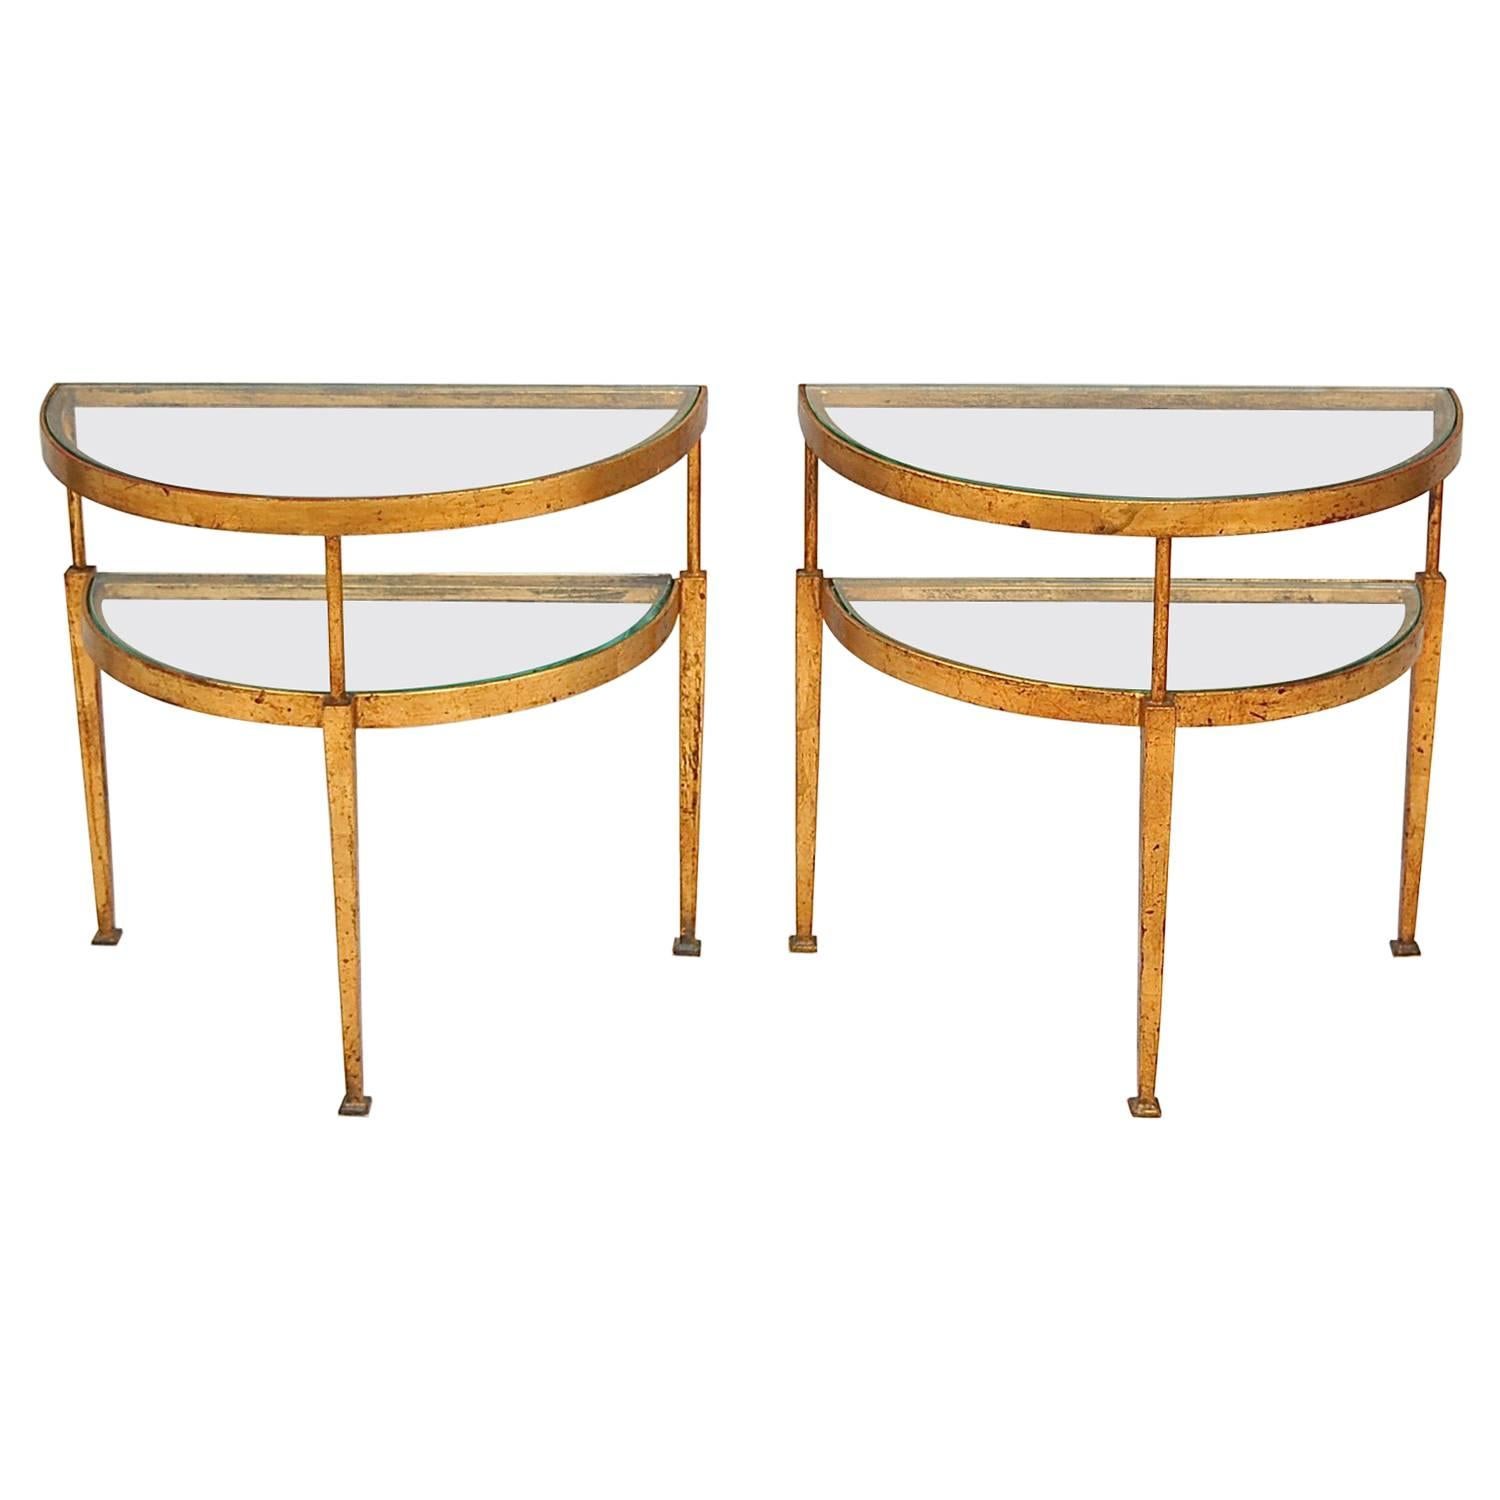 Pair of Demilune Gilt Metal and Glass Side Tables, Late 20th Century